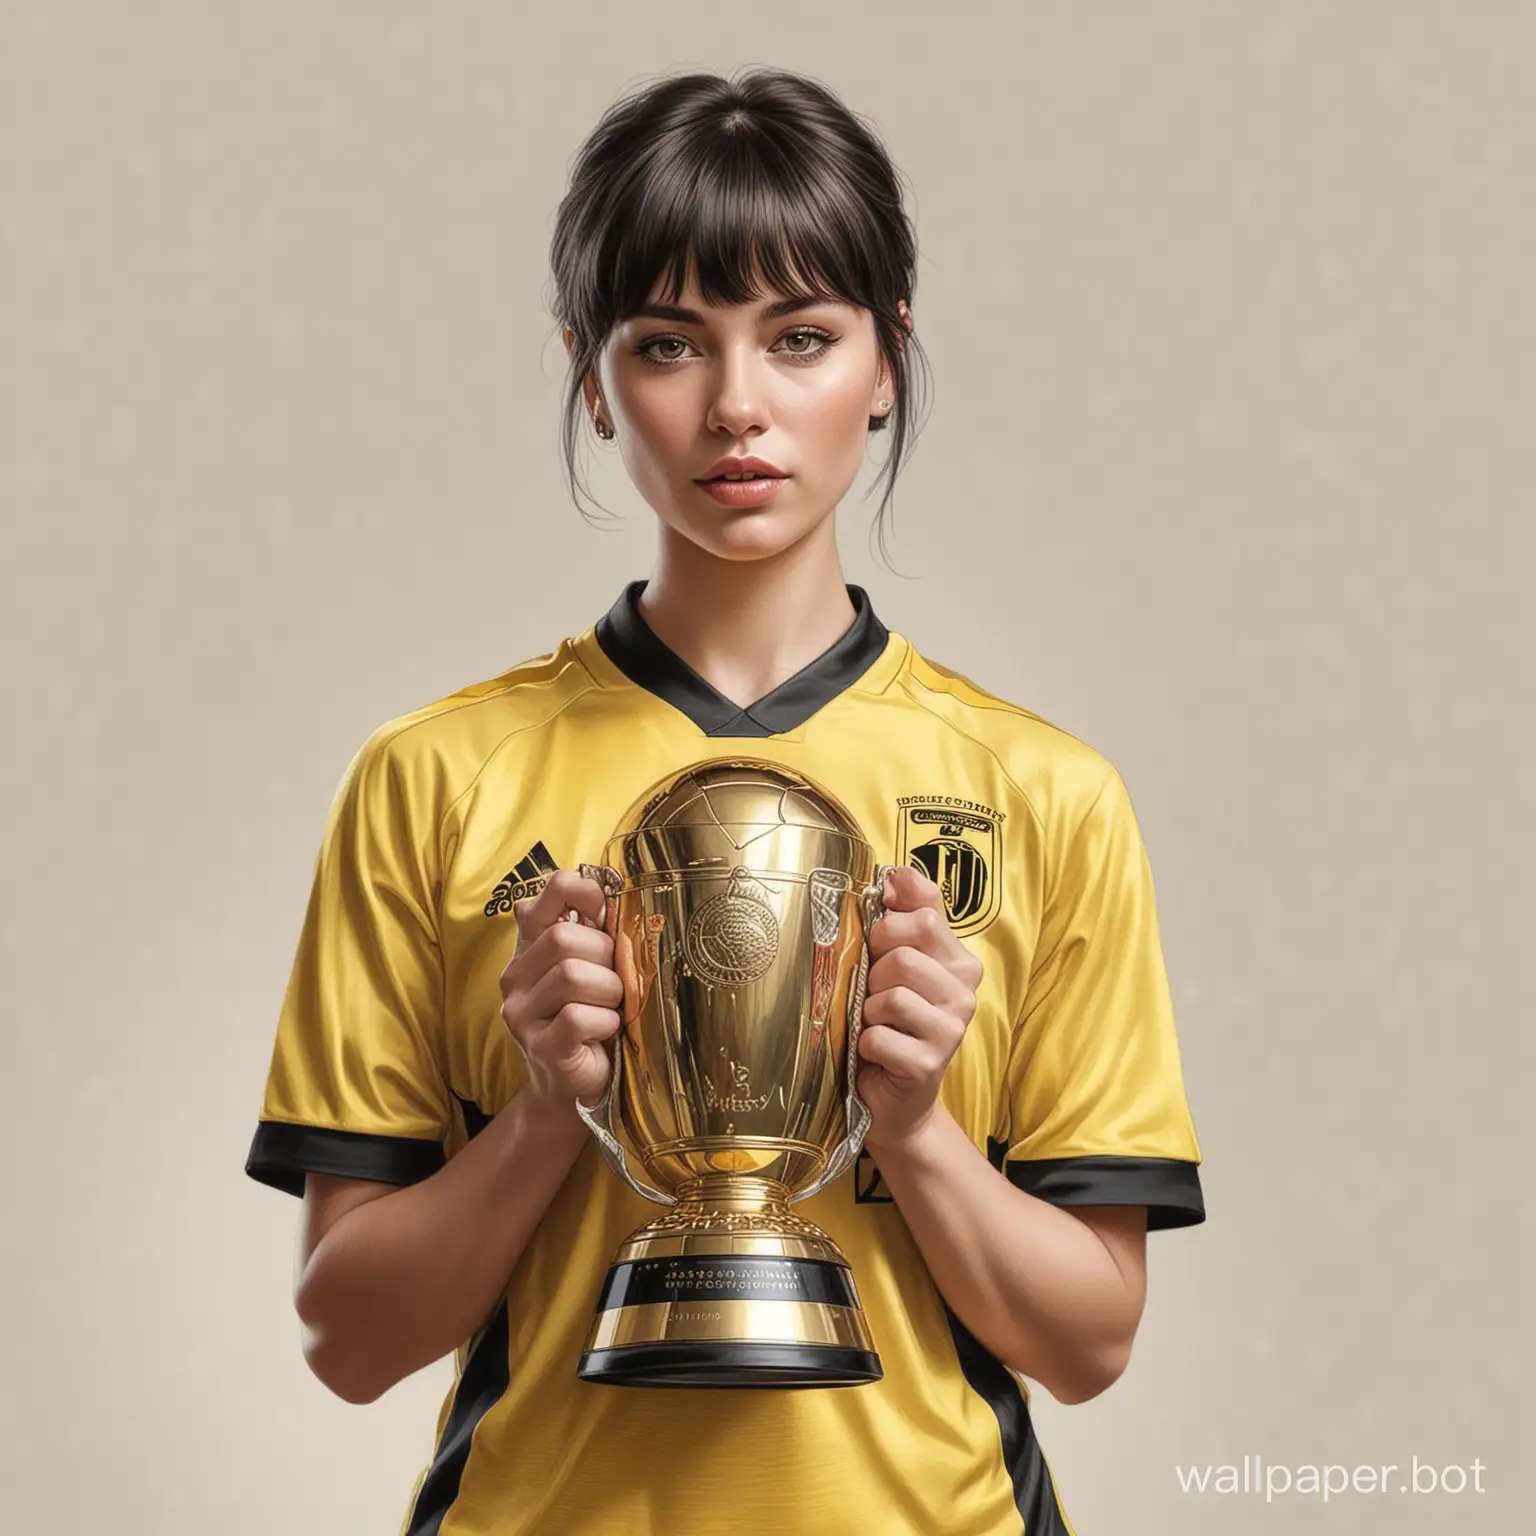 Sketch Tatiana Lanina 25 years old dark short hair with bangs 7th size breasts narrow waist in Yellow-black soccer uniform, holding a large Champions Cup on a white background high-realistic drawing colored pencil